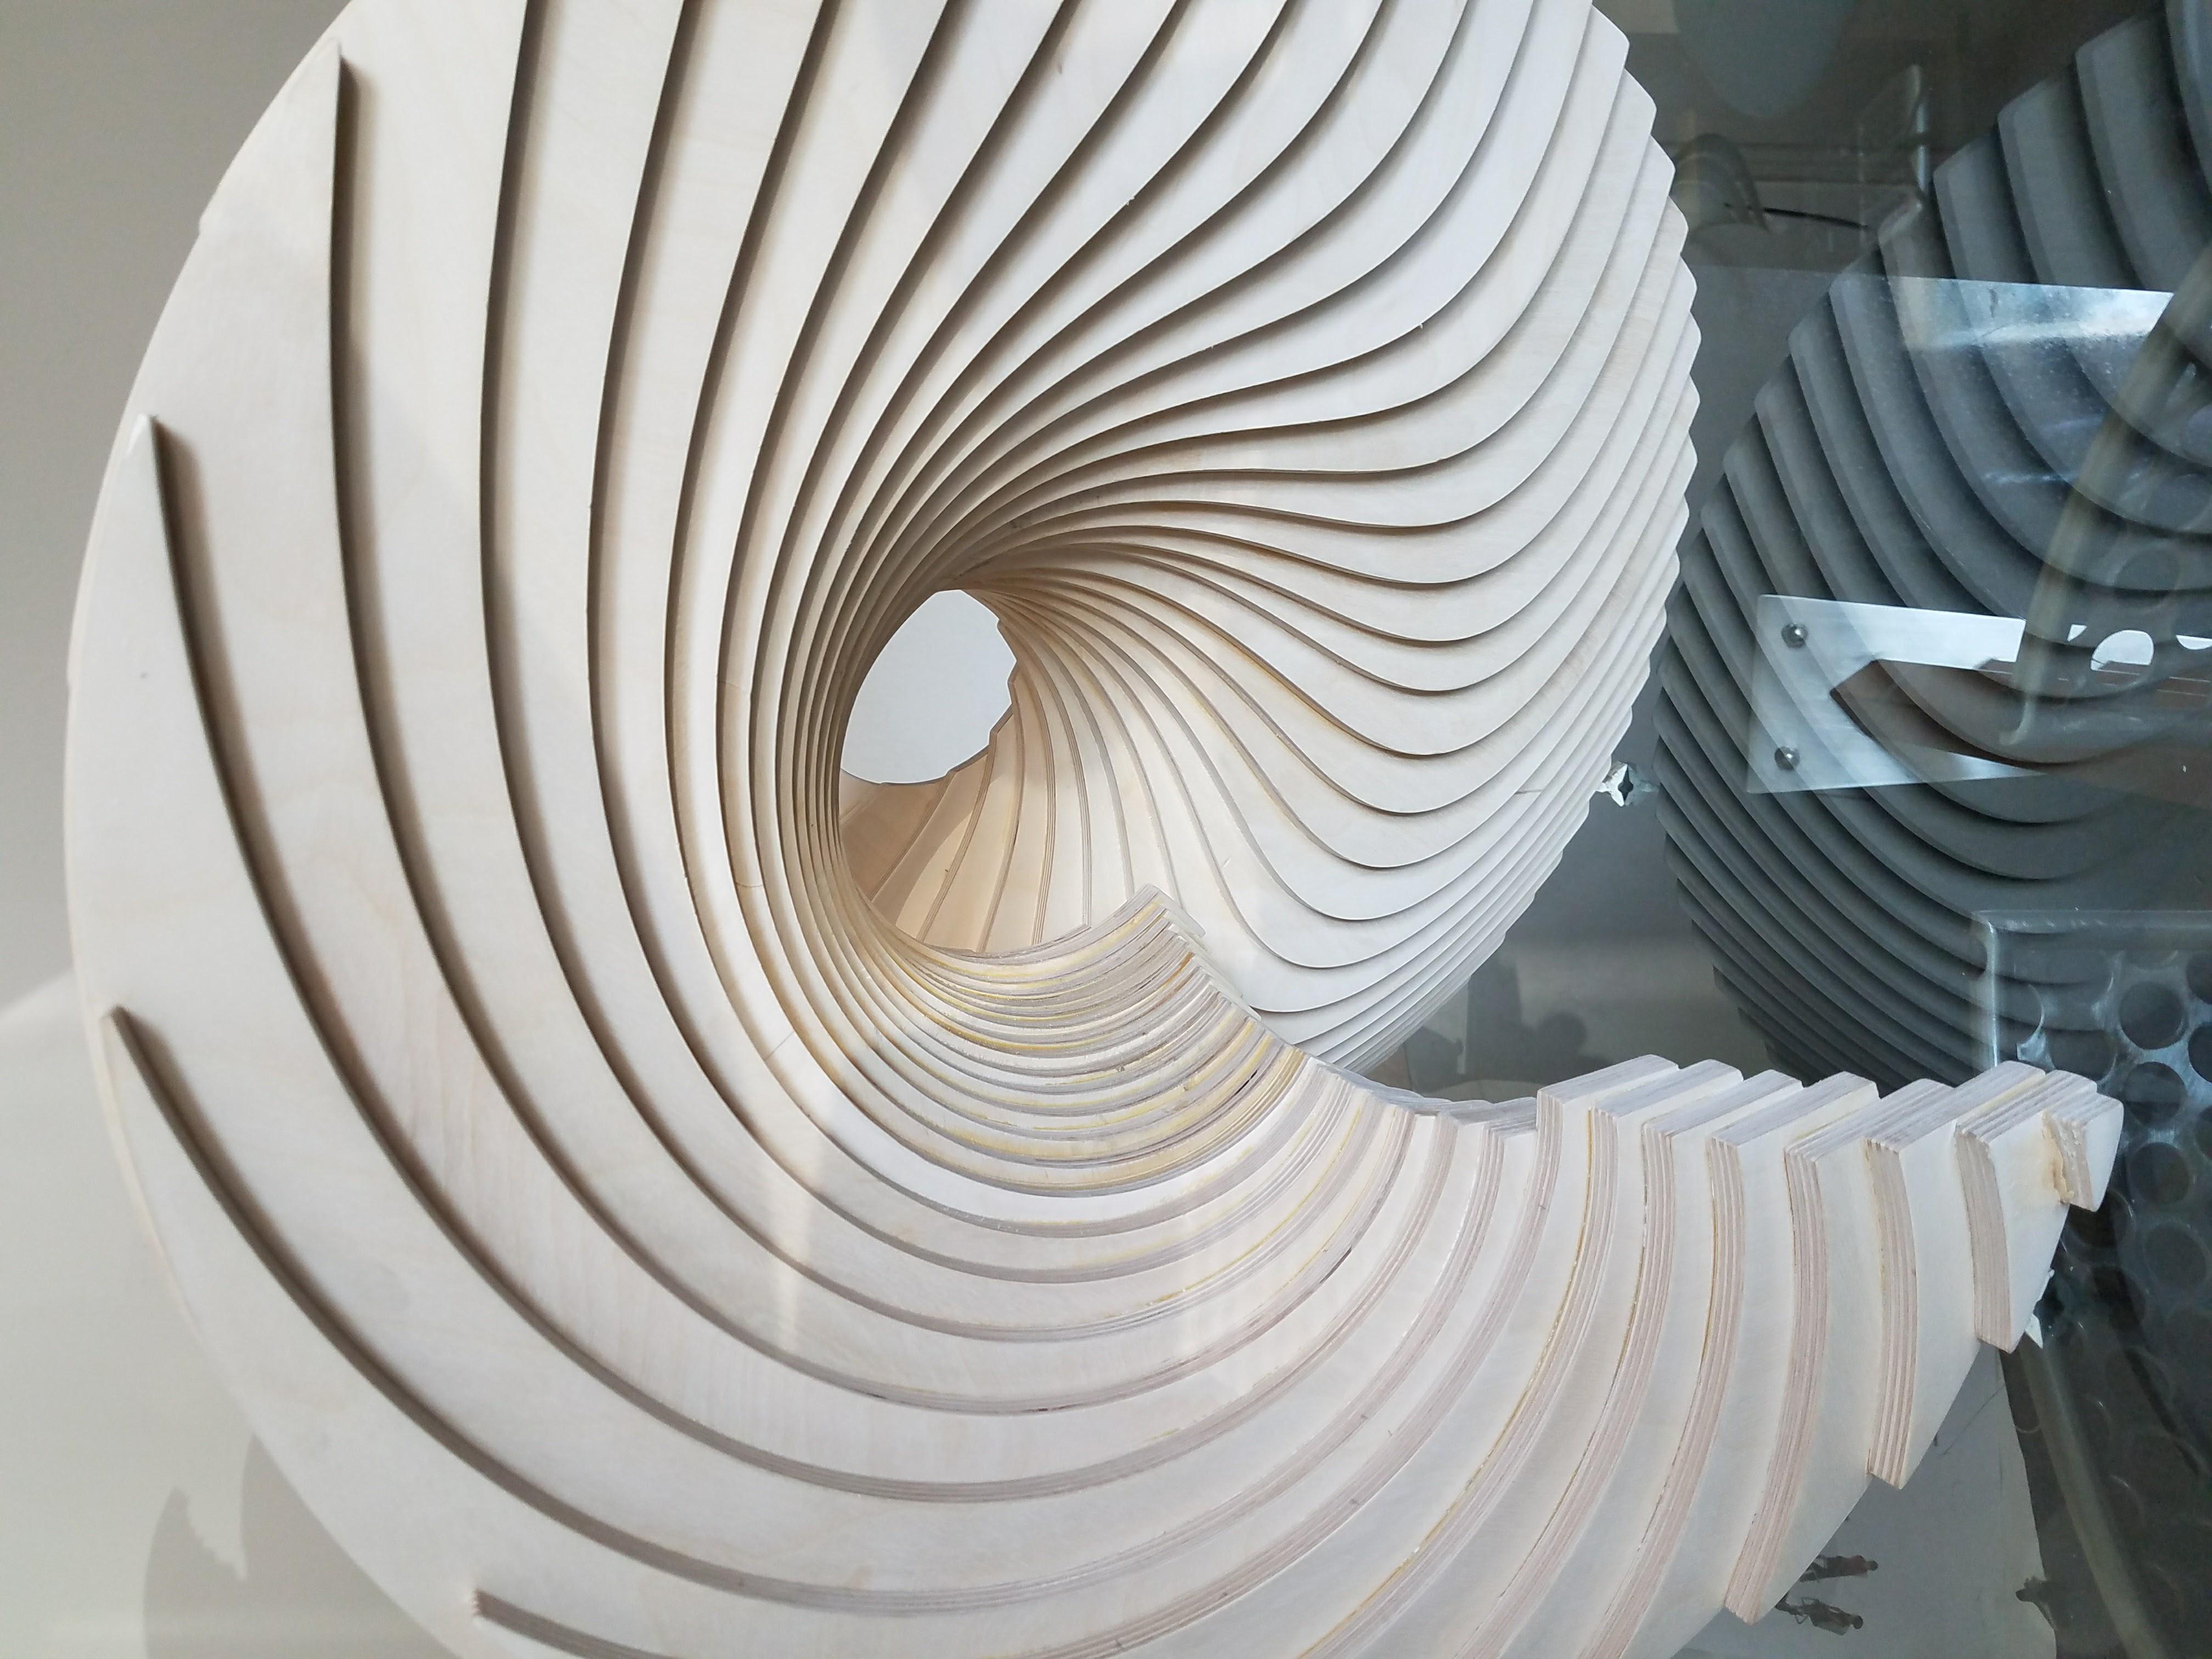 SPIRALIS - Abstract Sculpture by Lyle London